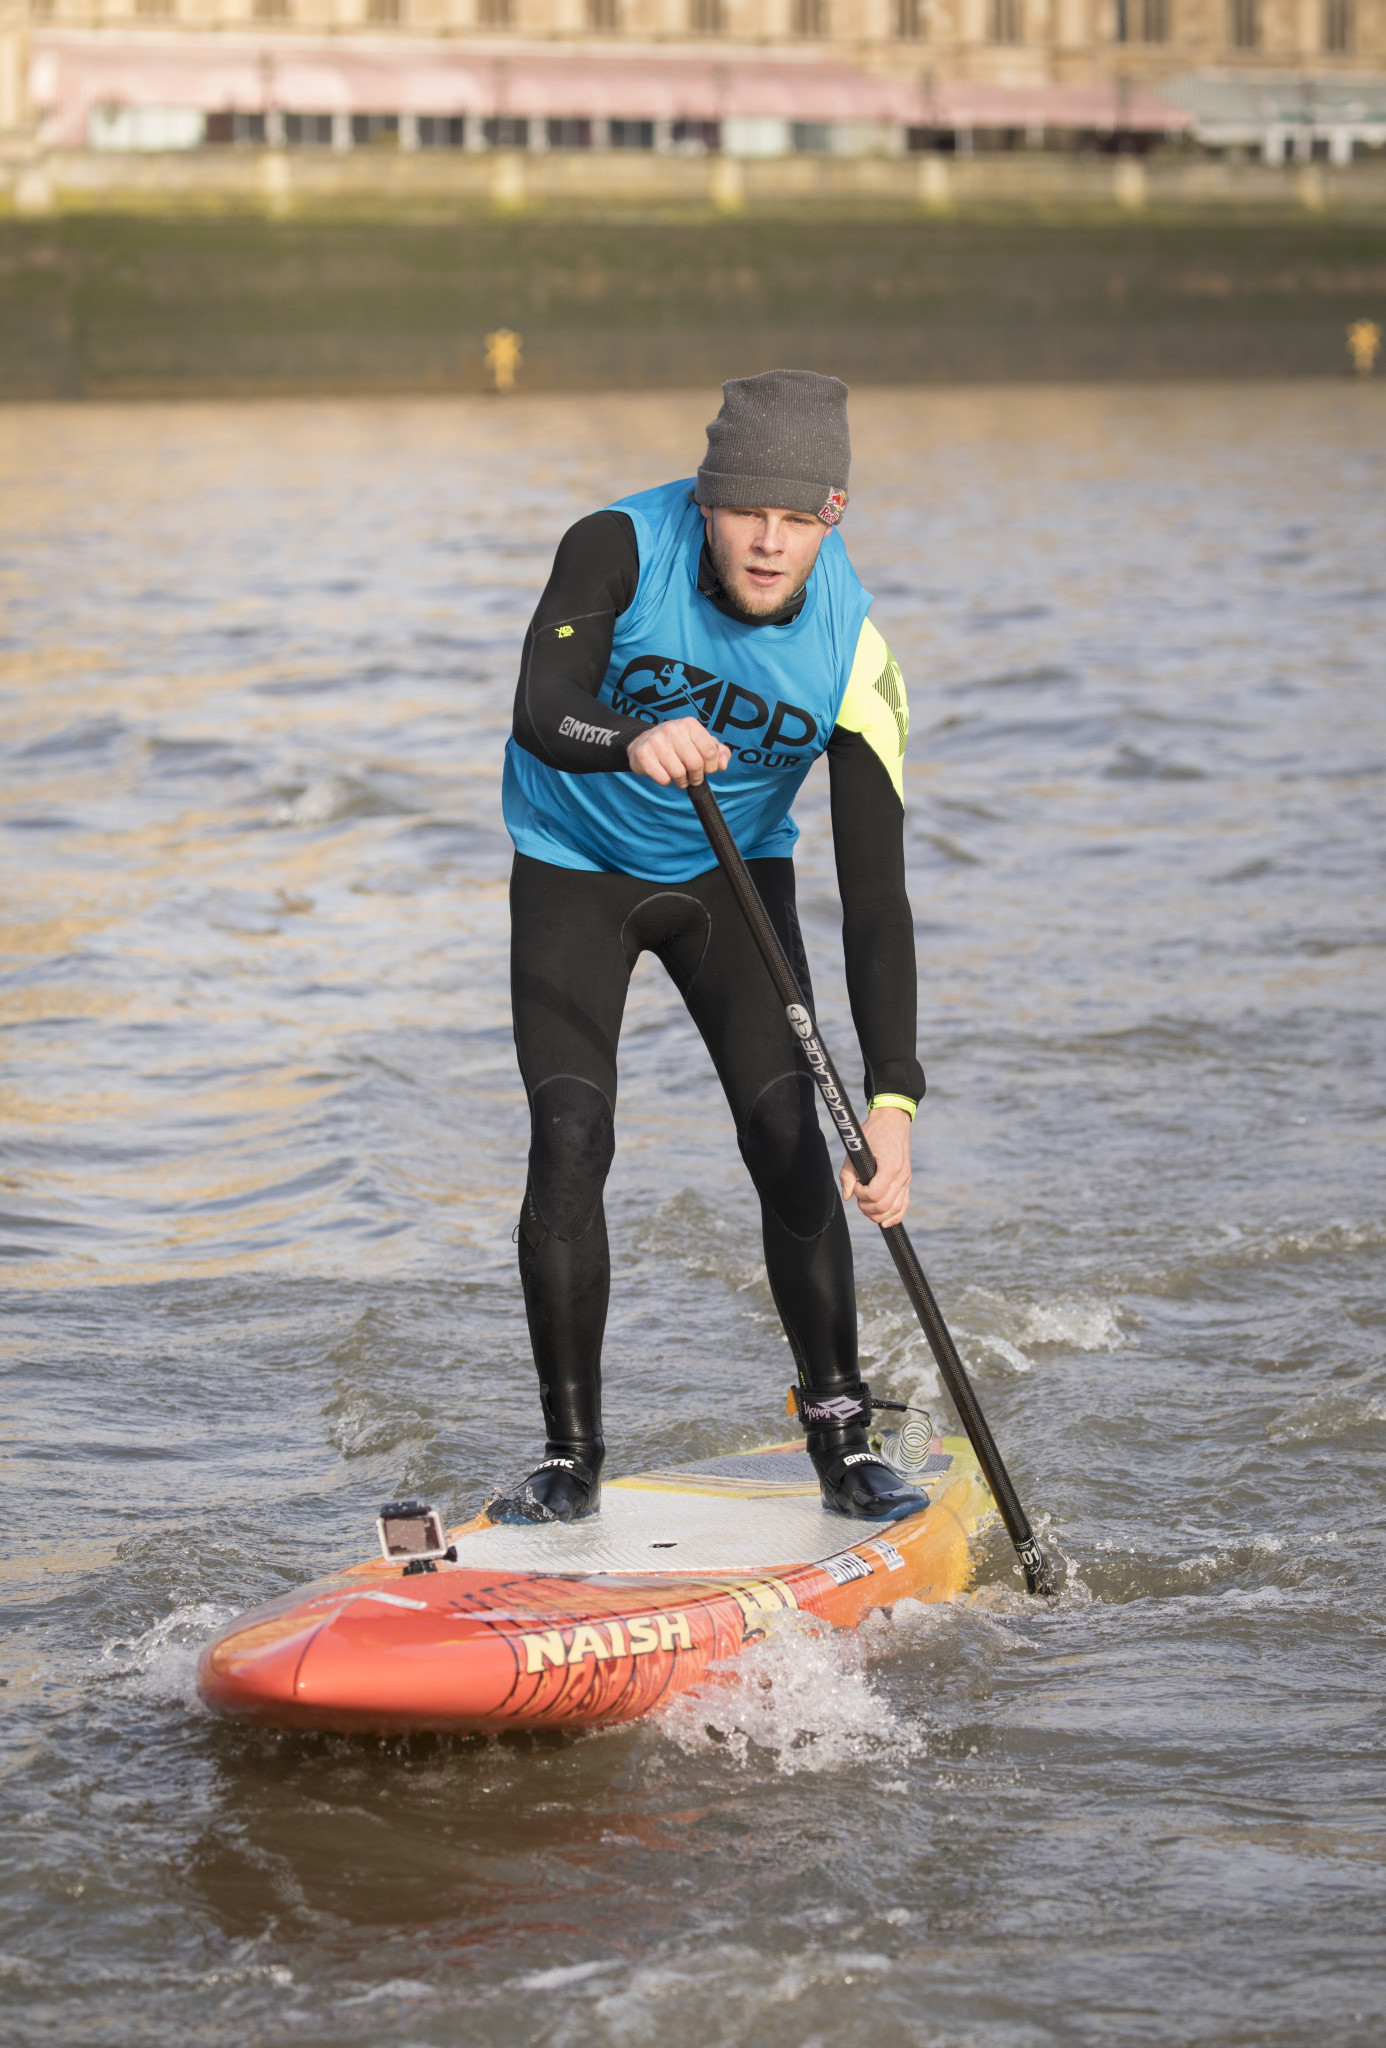 Casper Steinfath, a four-time SUP world champion and ISA vice-president, has claimed he can say 